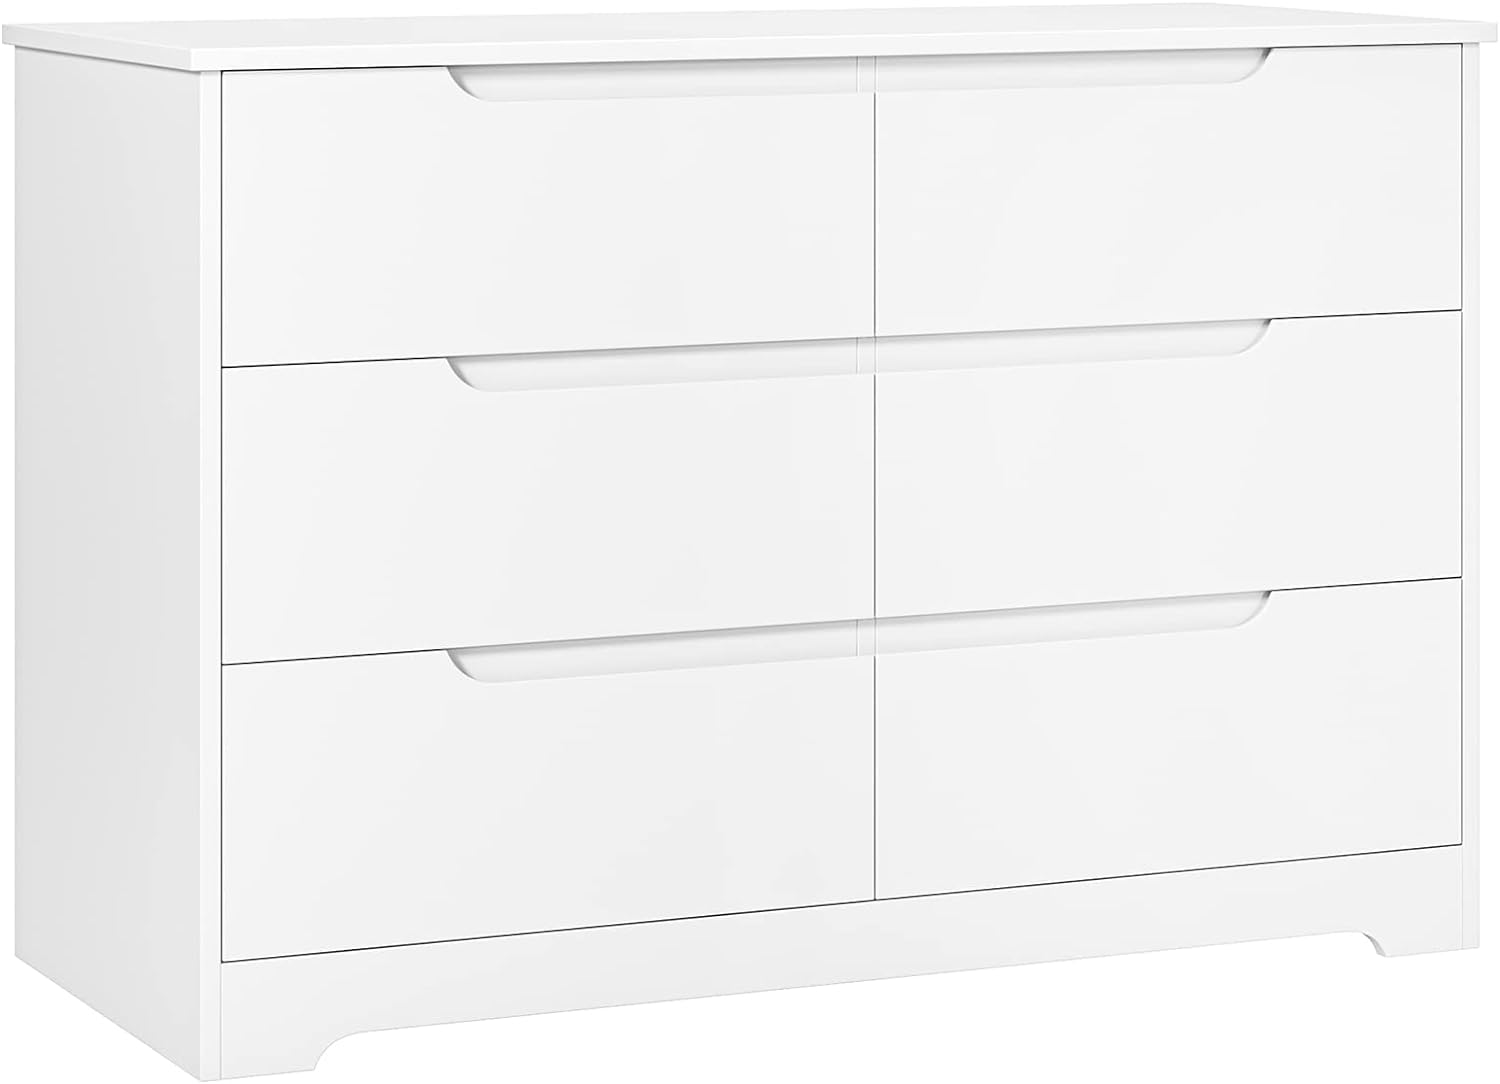 I purchased this dresser for my sons nursery. The item arrived almost a week earlier than expected; which was a huge plus. Once I opened the packaging, and started pulling the pieces out, I noticed one piece was split down the middle. I contacted the seller, and got a response in less than an hour. They told me they would ship the broken piece to me as soon as possible. This conversation happened late in the evening. The next morning I got a tracking number, and the piece arrived at my home a m